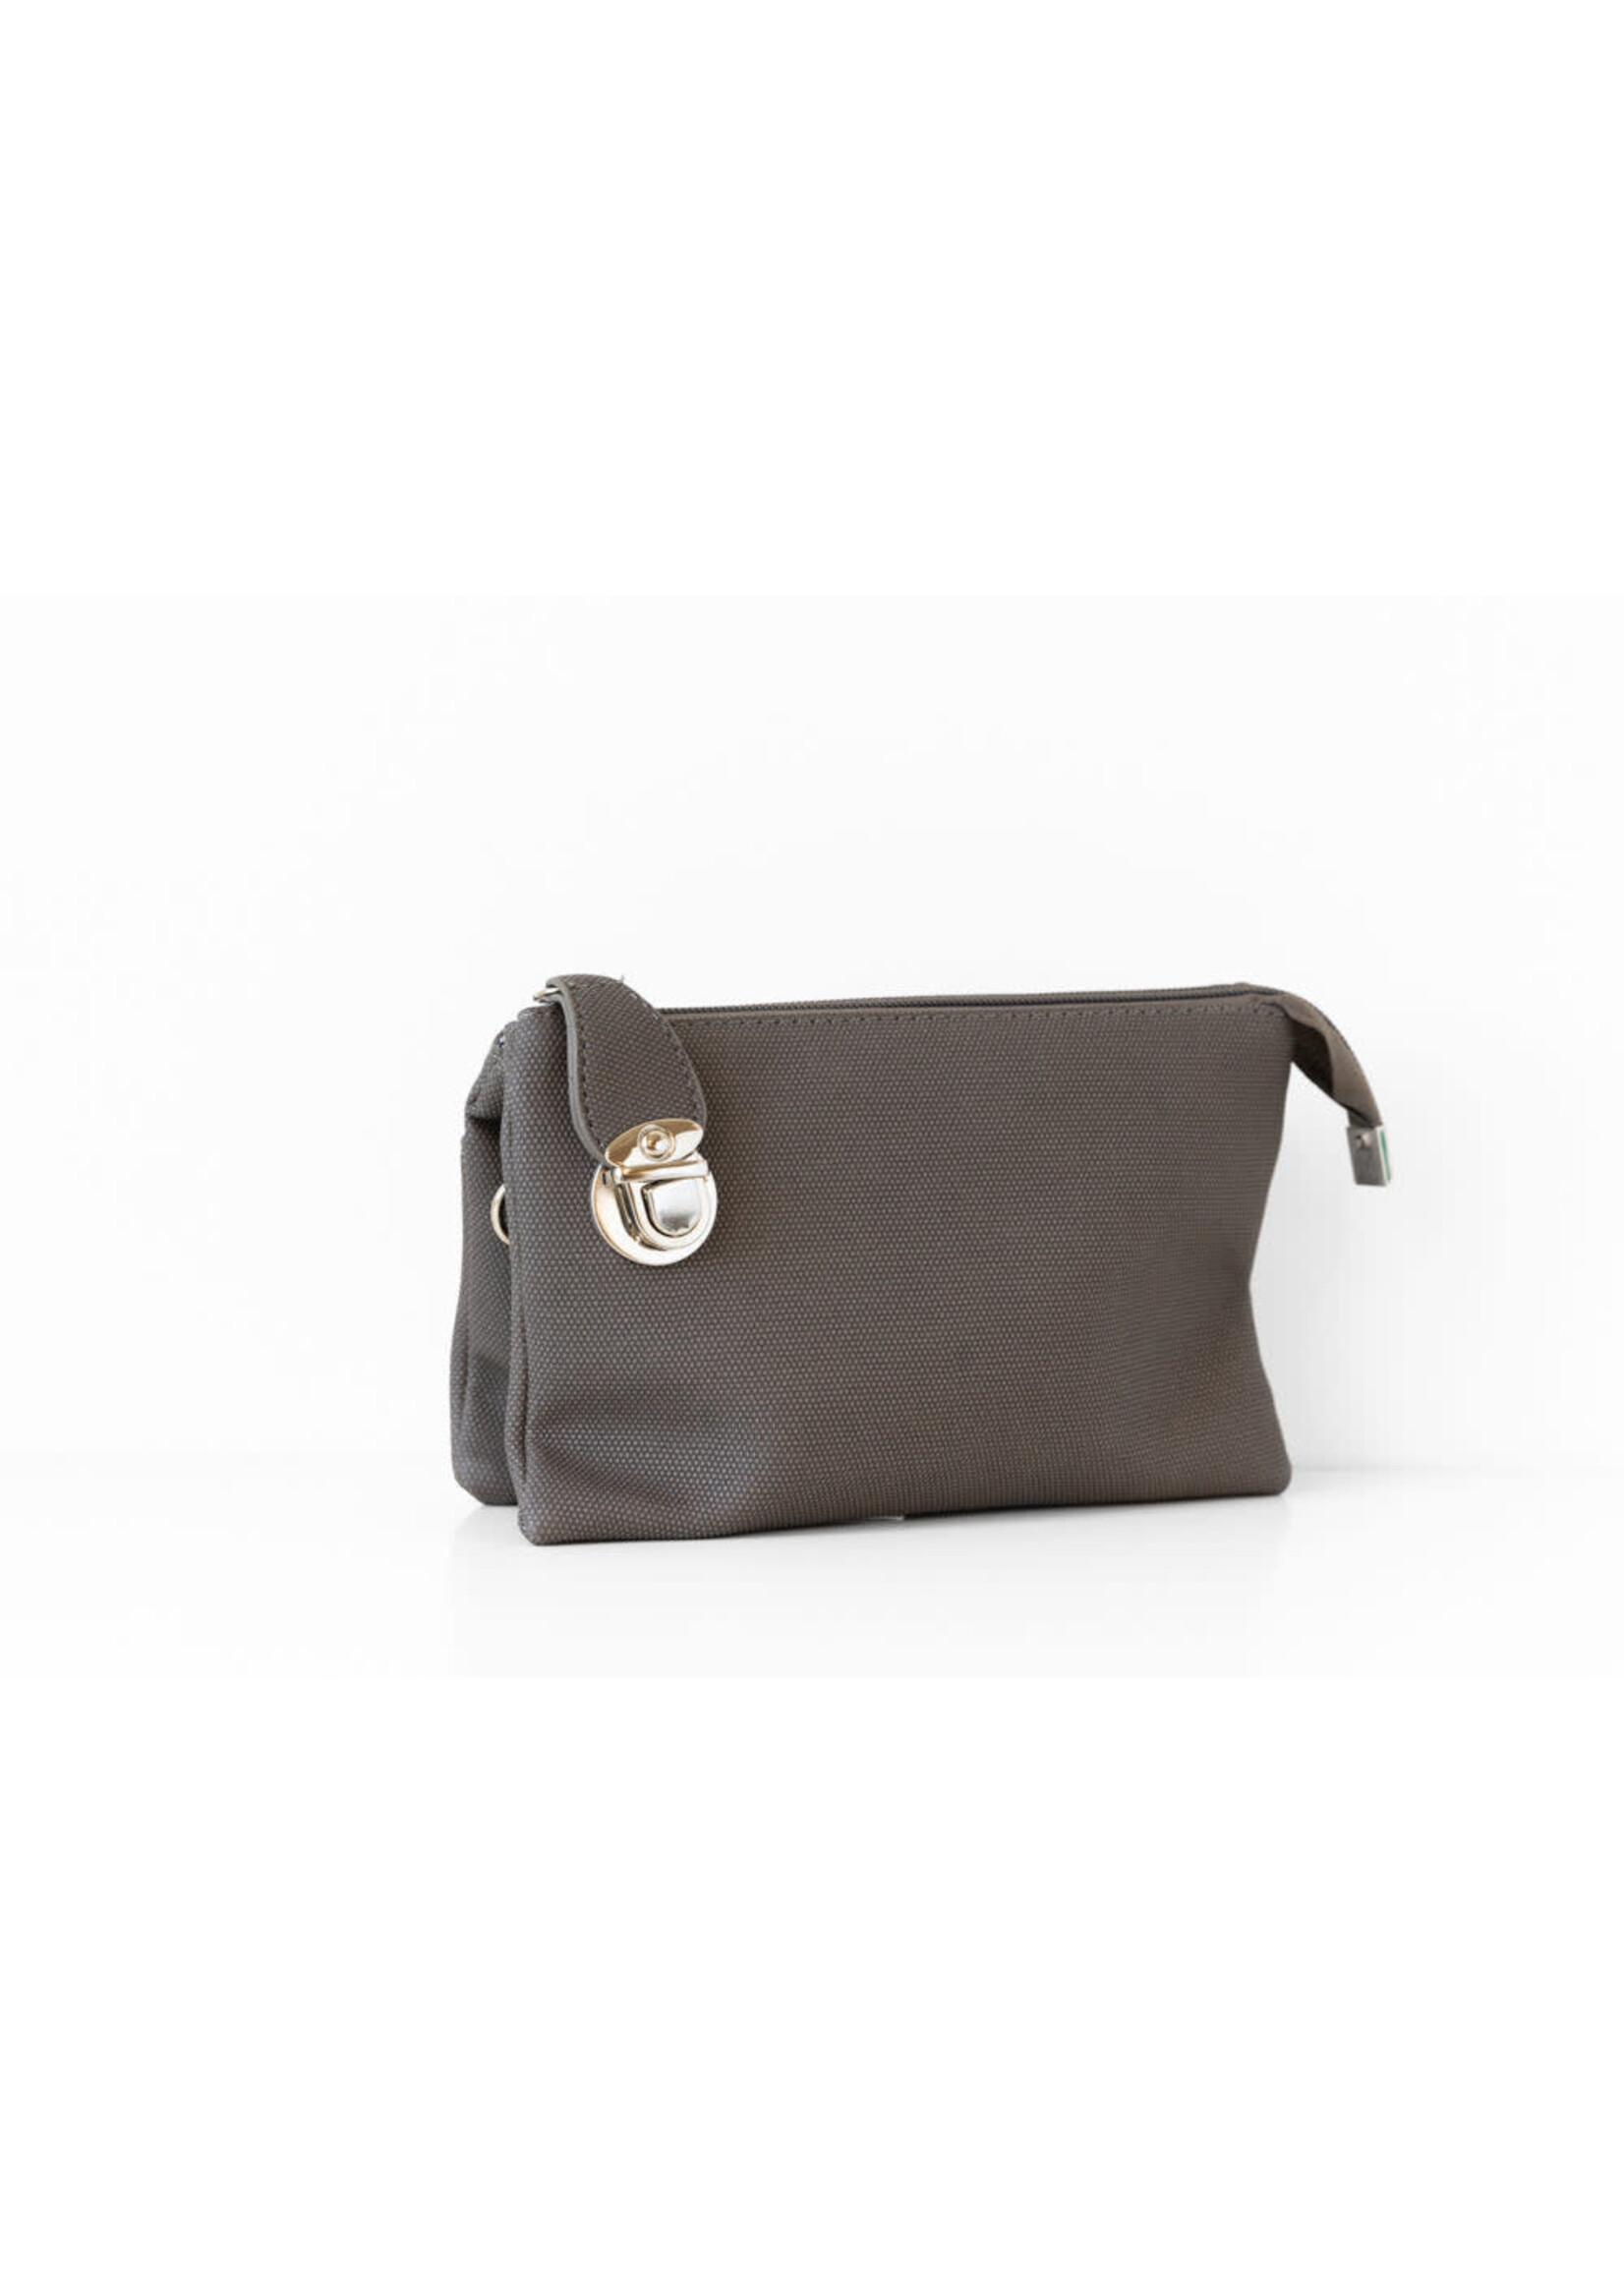 CARACOL CAR 7012 CLUTCH MUST HAVE